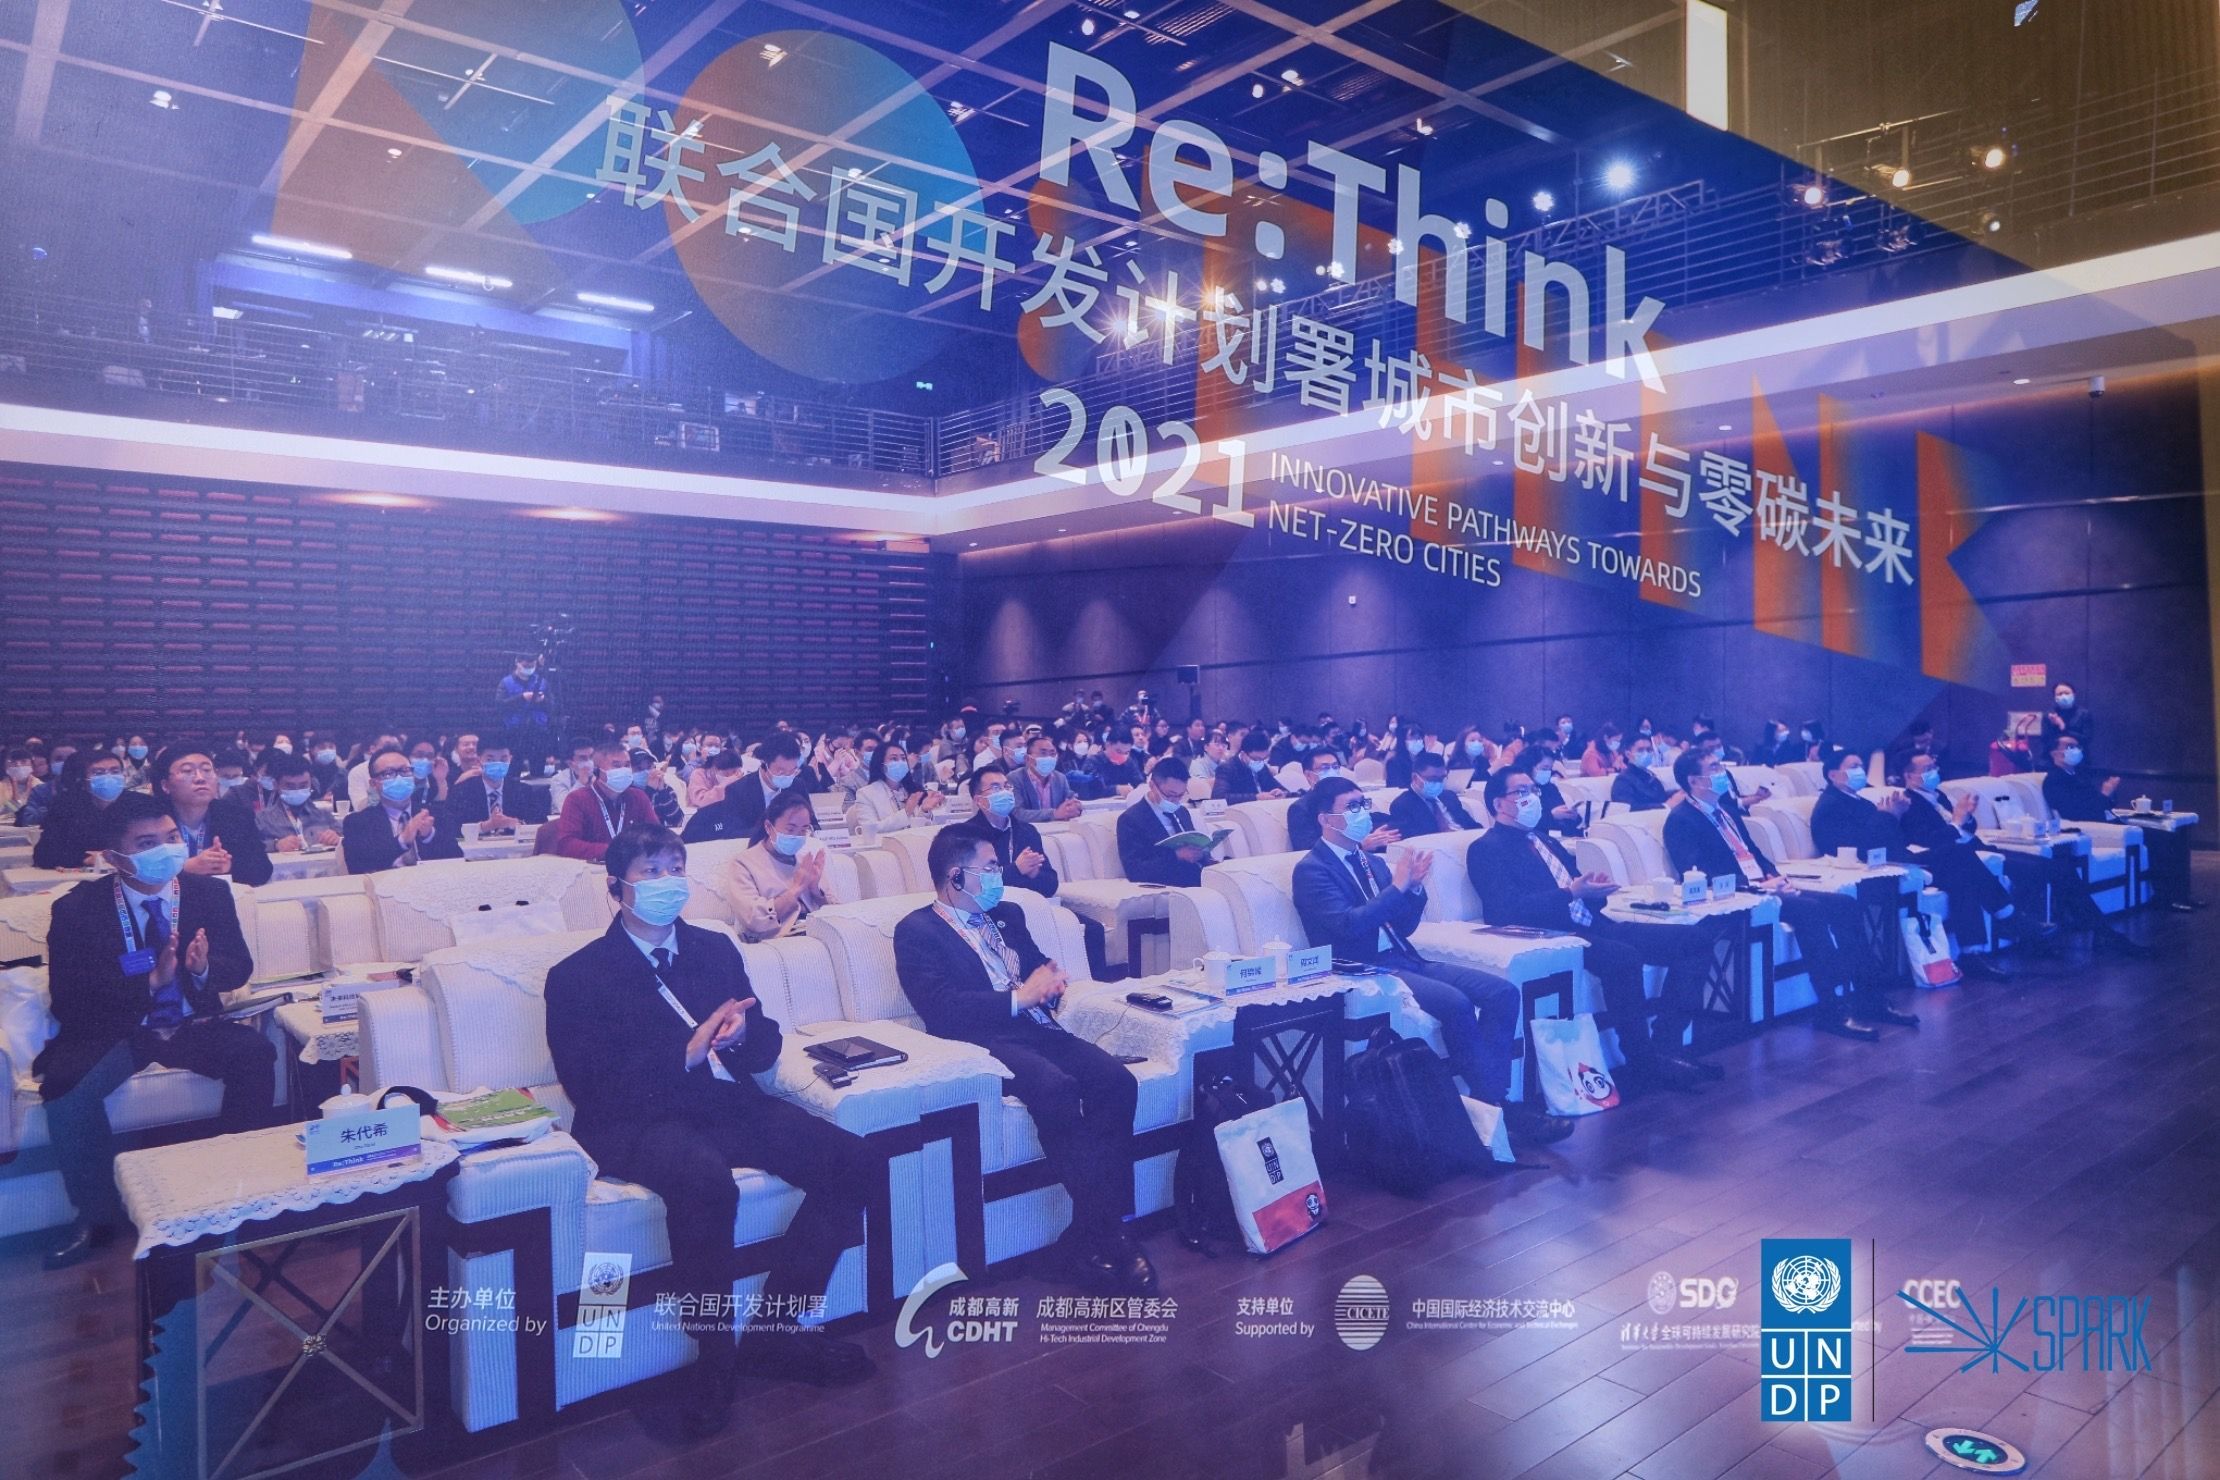 Unleashing the Potential of Cities for a Net-zero Future: UNDP Re:Think 2021 conference held in Beijing and Chengdu to pursue innovative development pathways for climate action